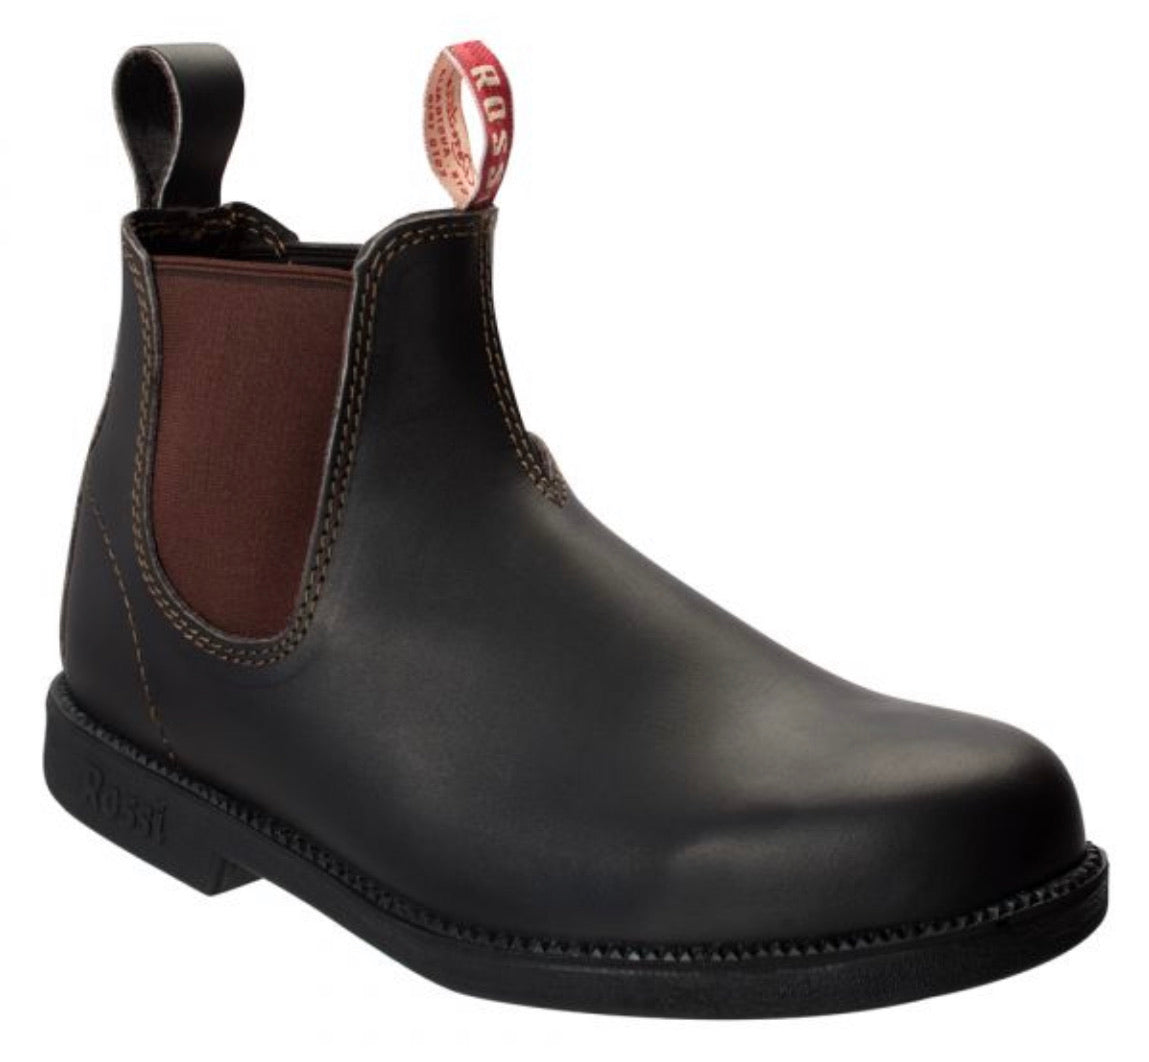 Rossi Boots 607 Booma Claret Brown Soft Toe Chelsea Boot Made In Australia